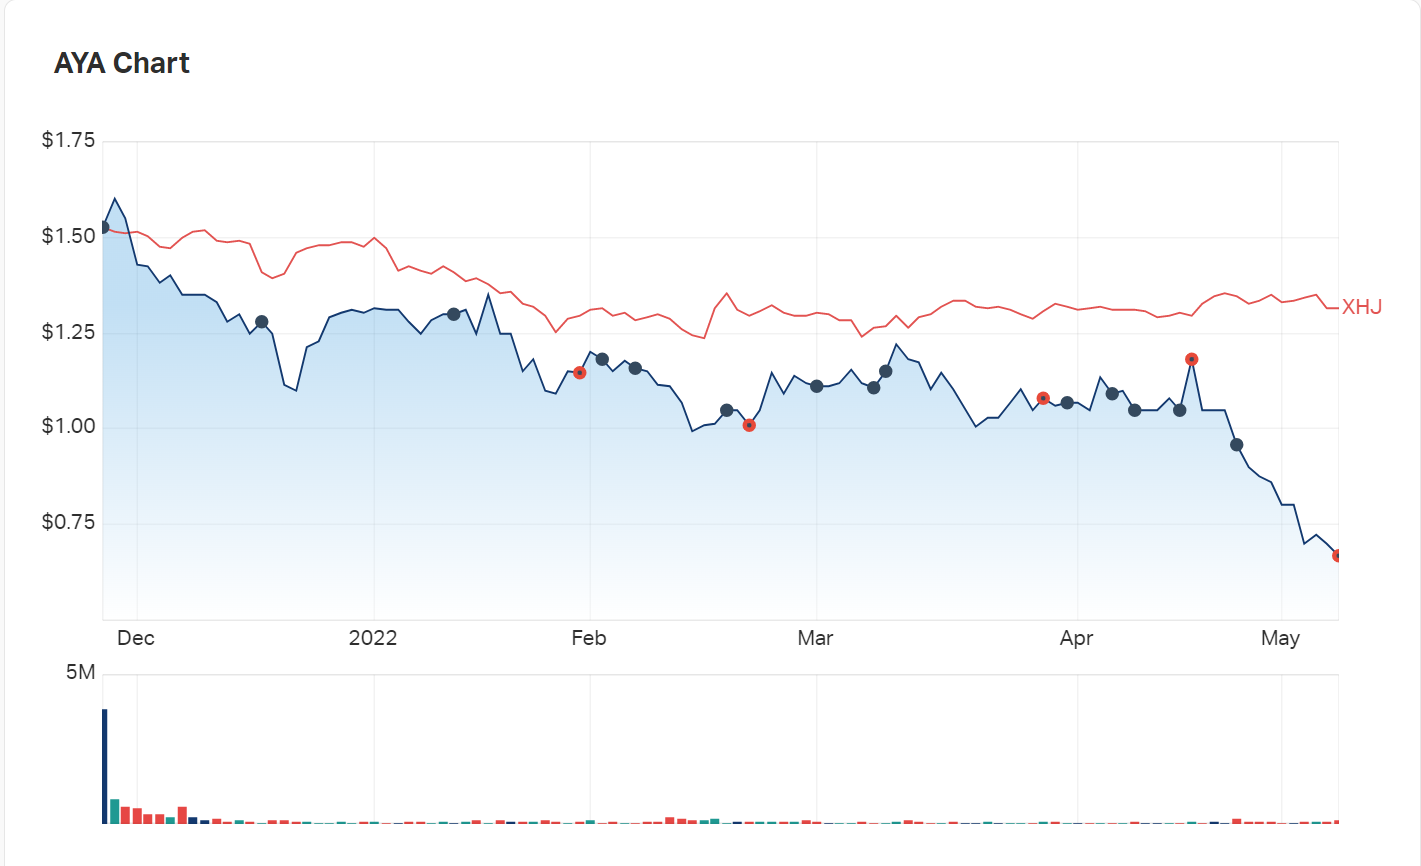 Artrya's share price over the last six months compared to the XHJ health index 